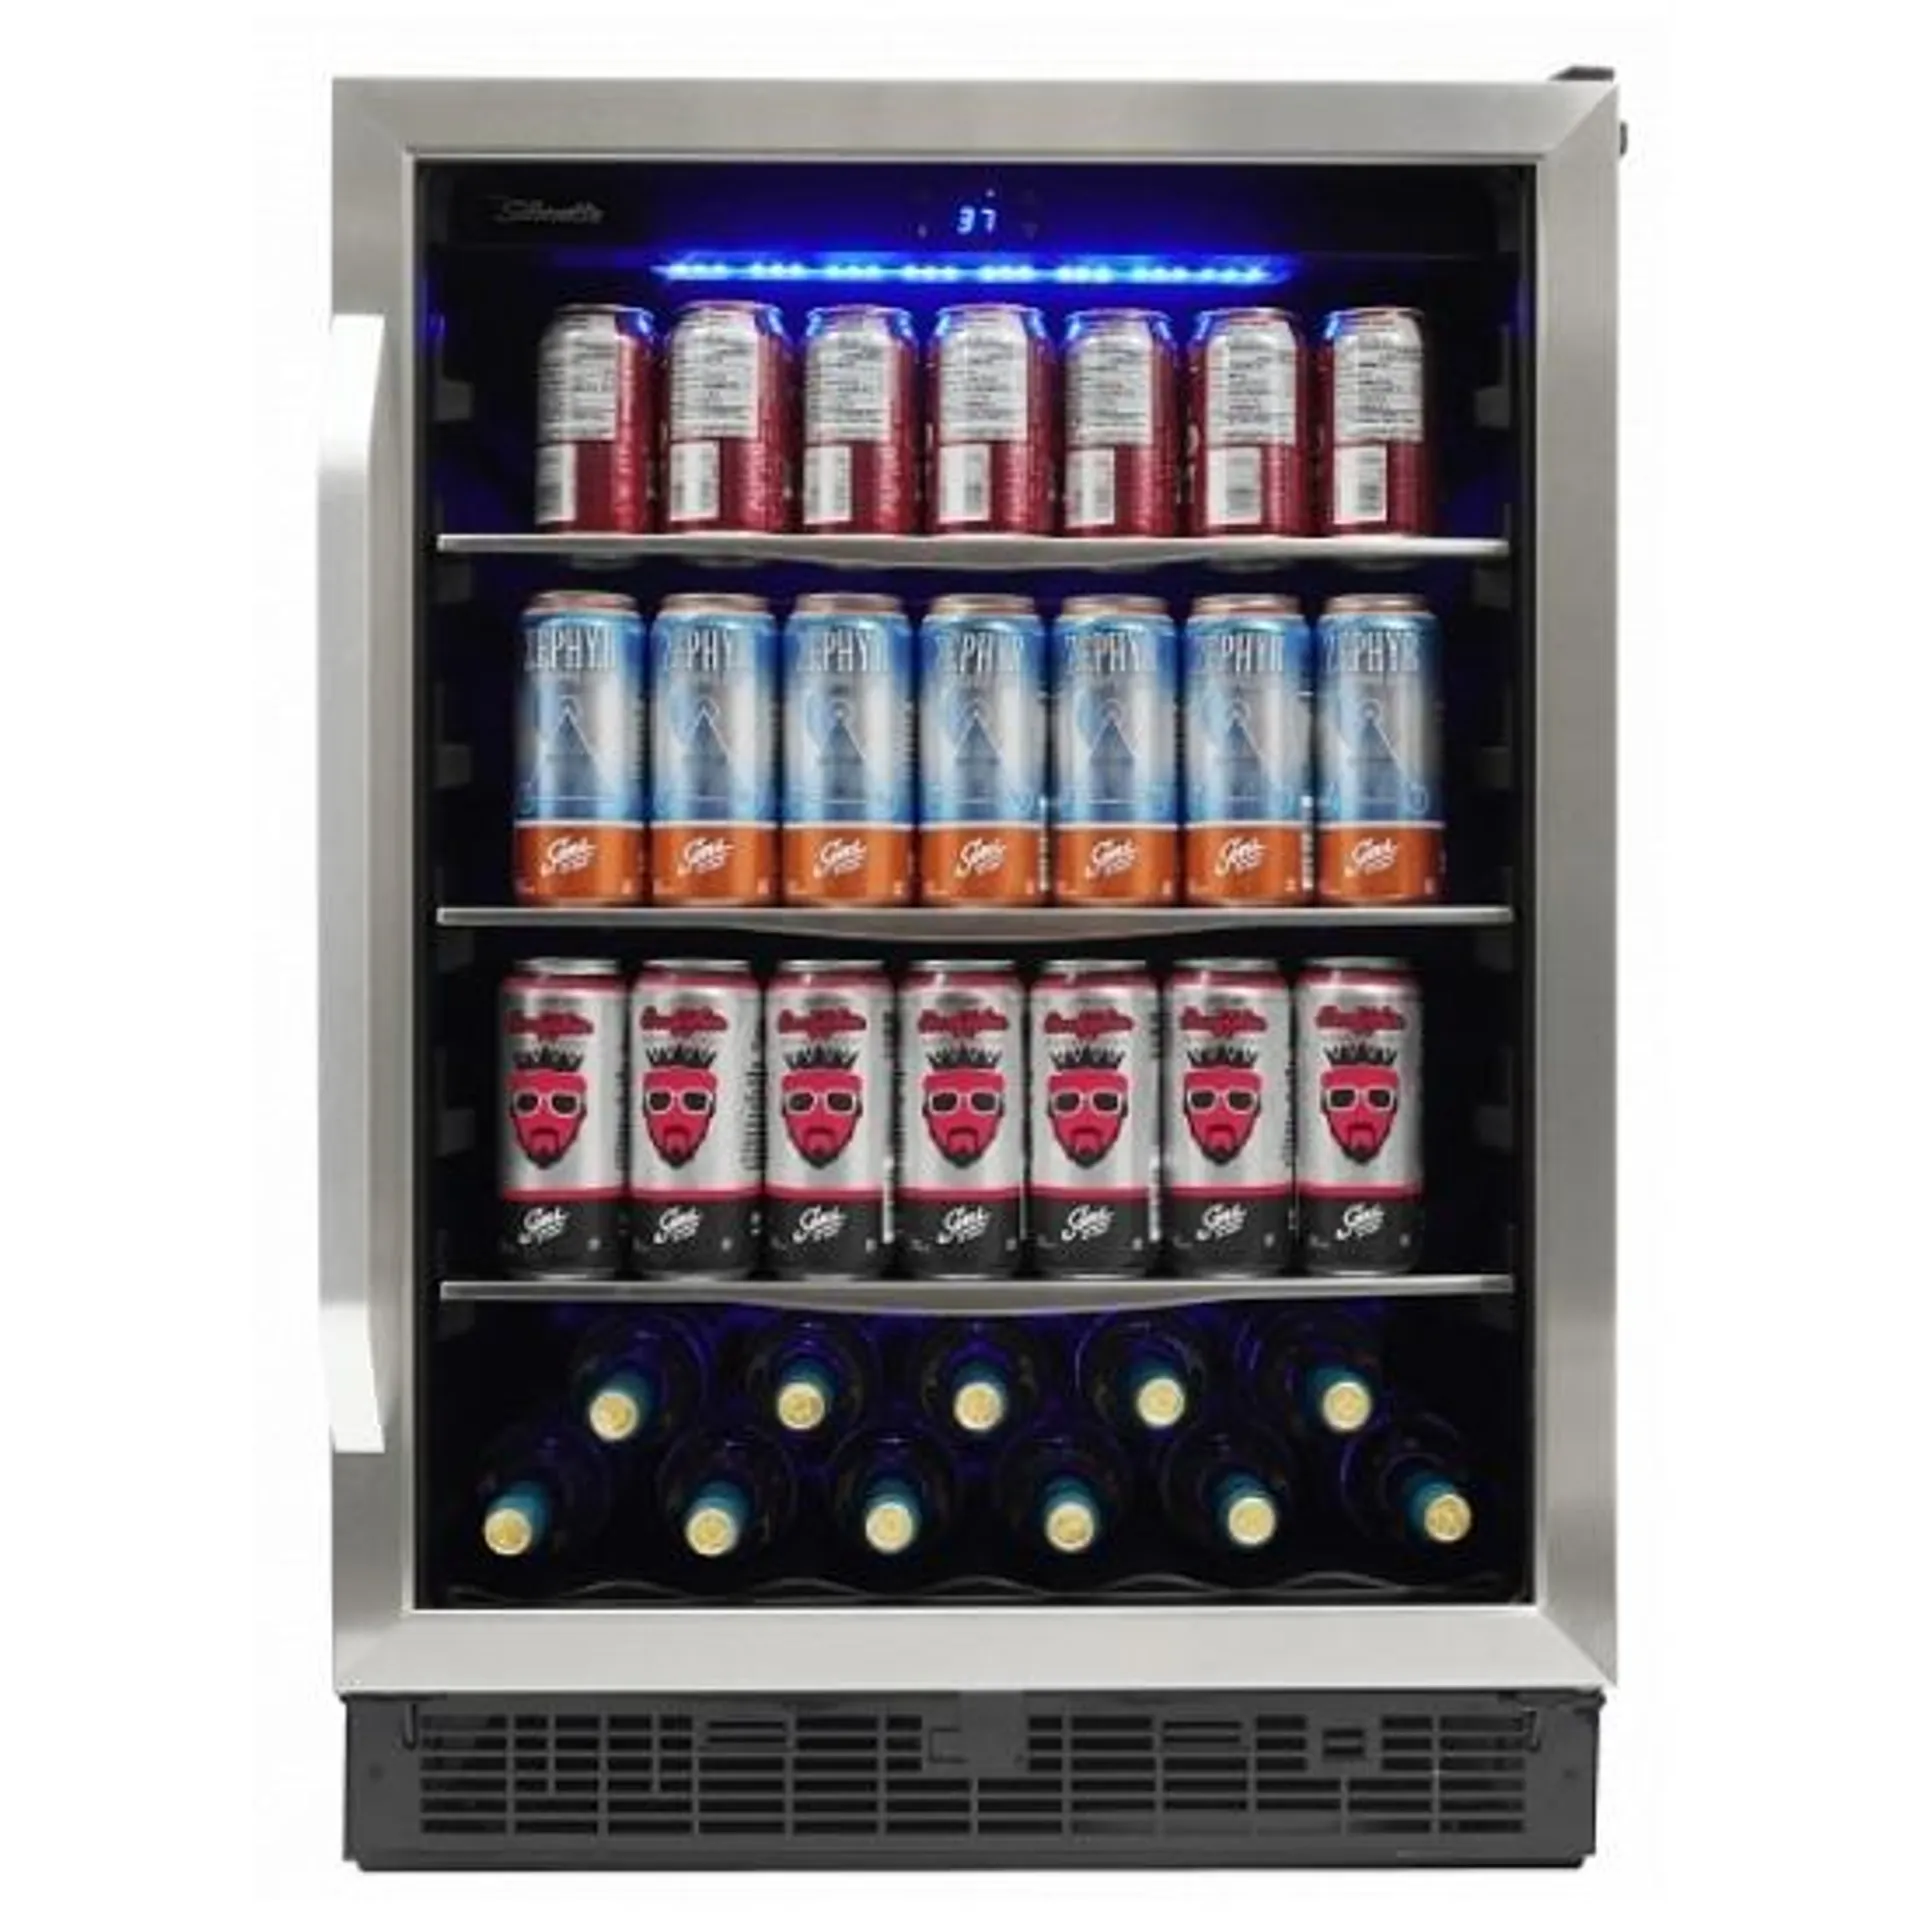 Silhouette SBC057D1BSS Under Counter Refrigeration, 24 inch Width, 24 inch Width, Stainless Steel colour Blue LED Interior, Wave Wine Storage